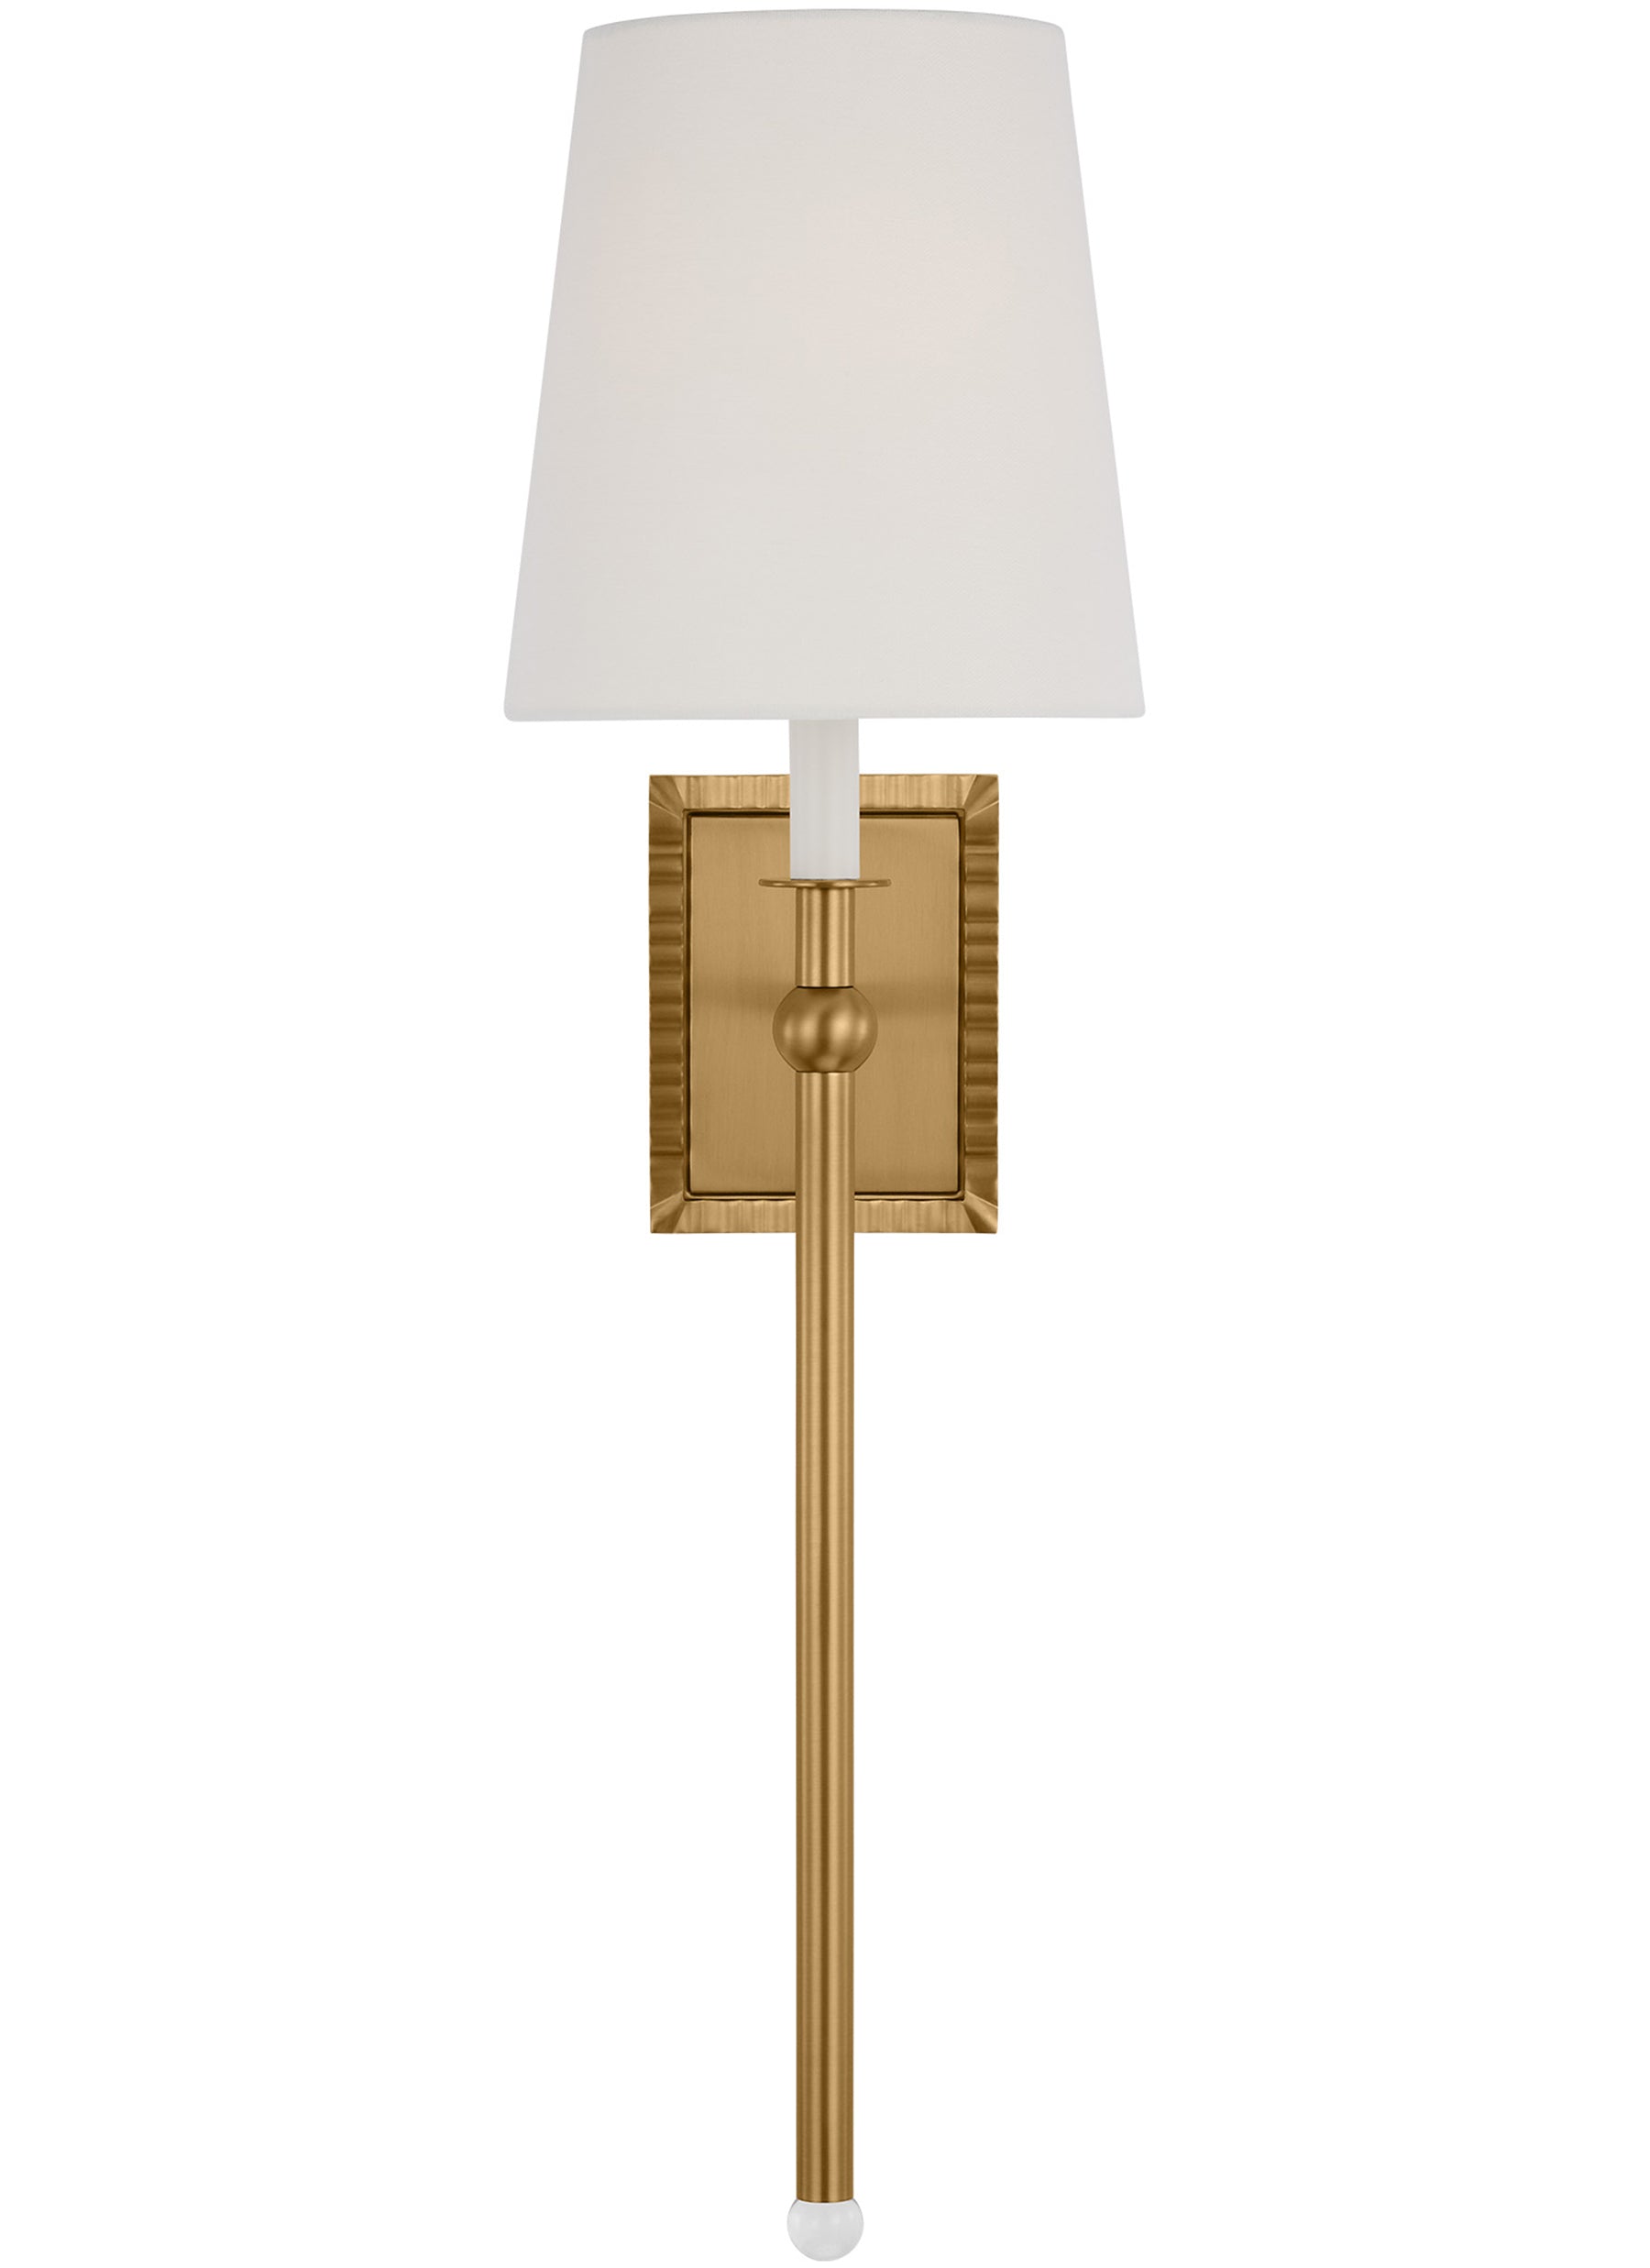 Baxley 1L tall wall sconce - AW1211BBS